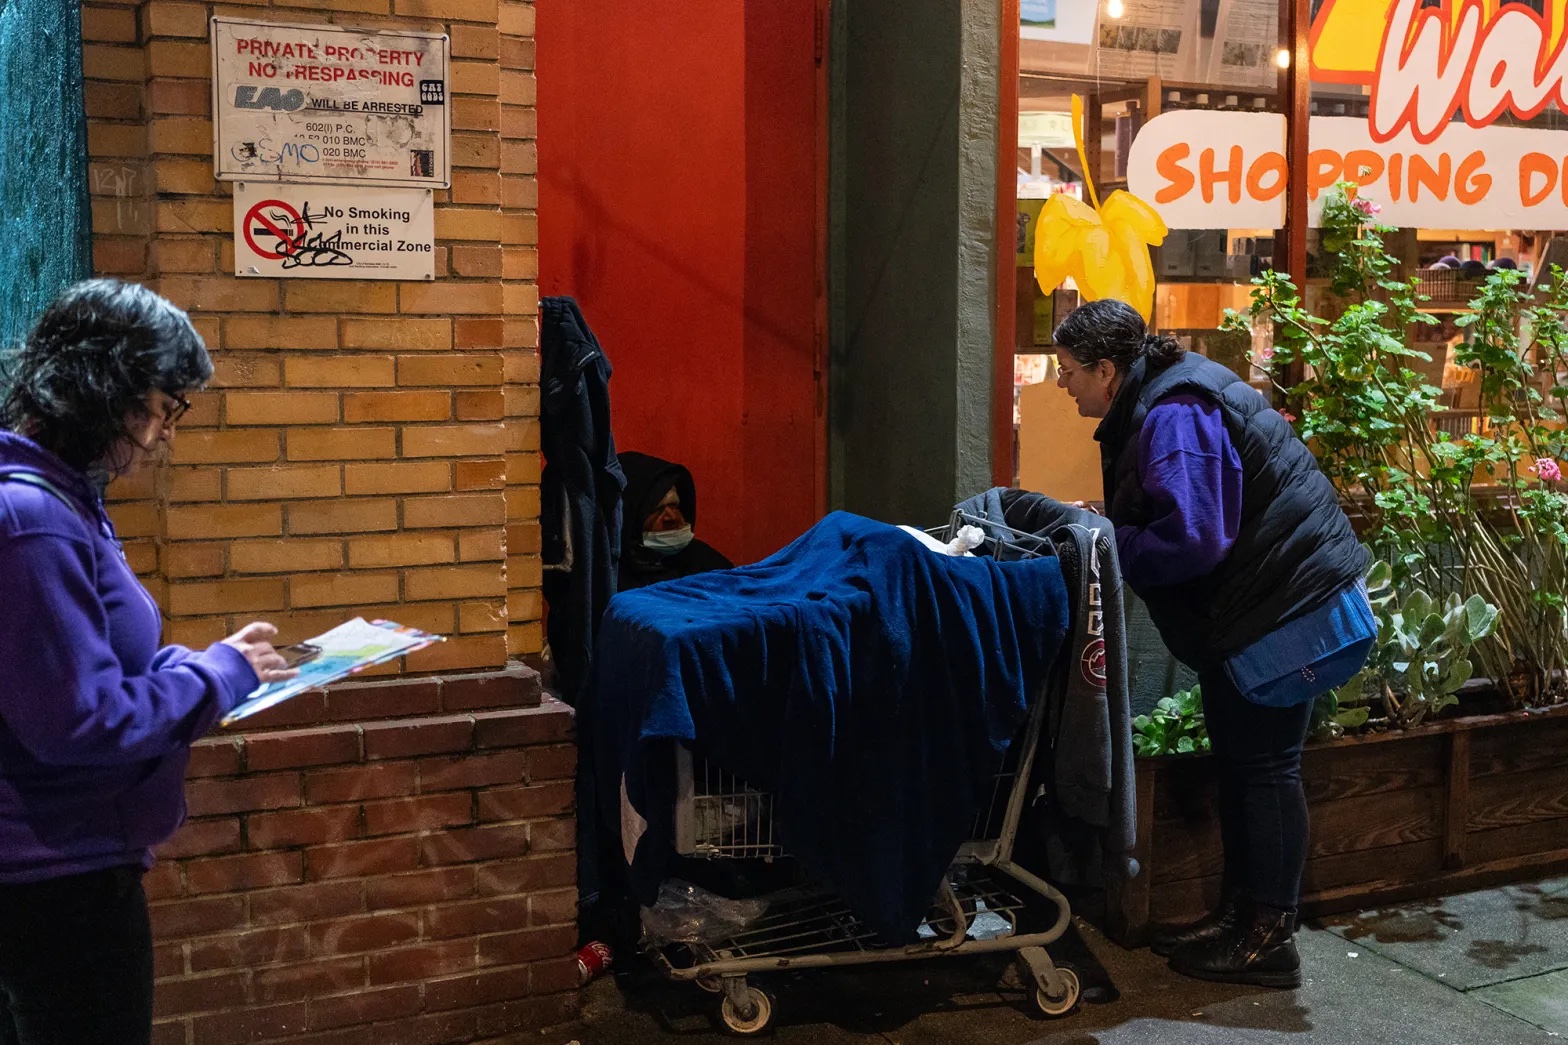 two women talk to a man sitting behind a shopping cart with belongings in it